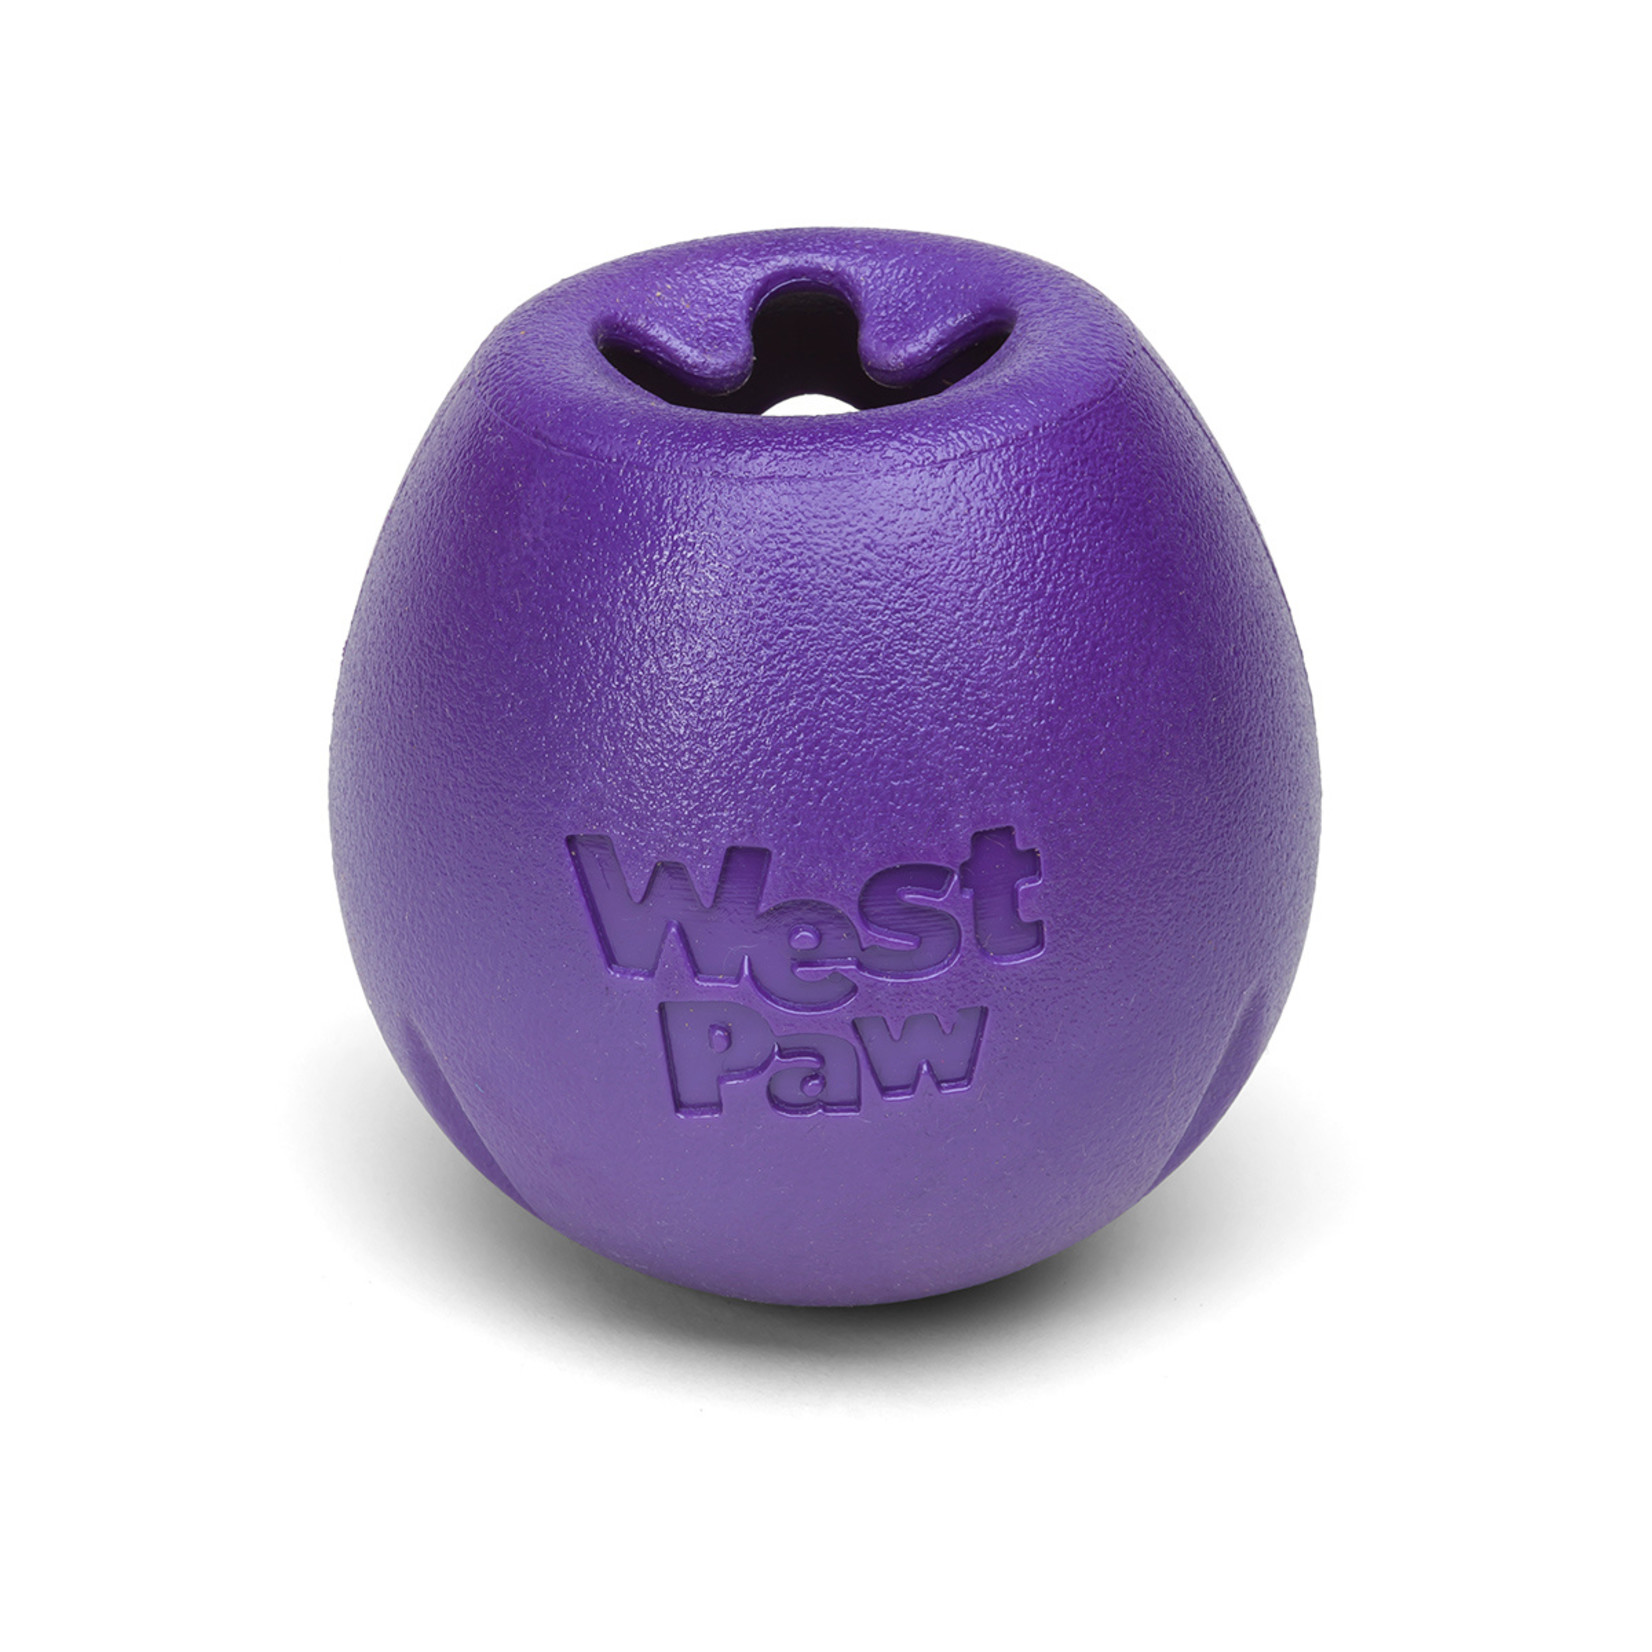 West Paw WESTPAW Rumbl Dog Toy - Final Sale - No returns/exchanges